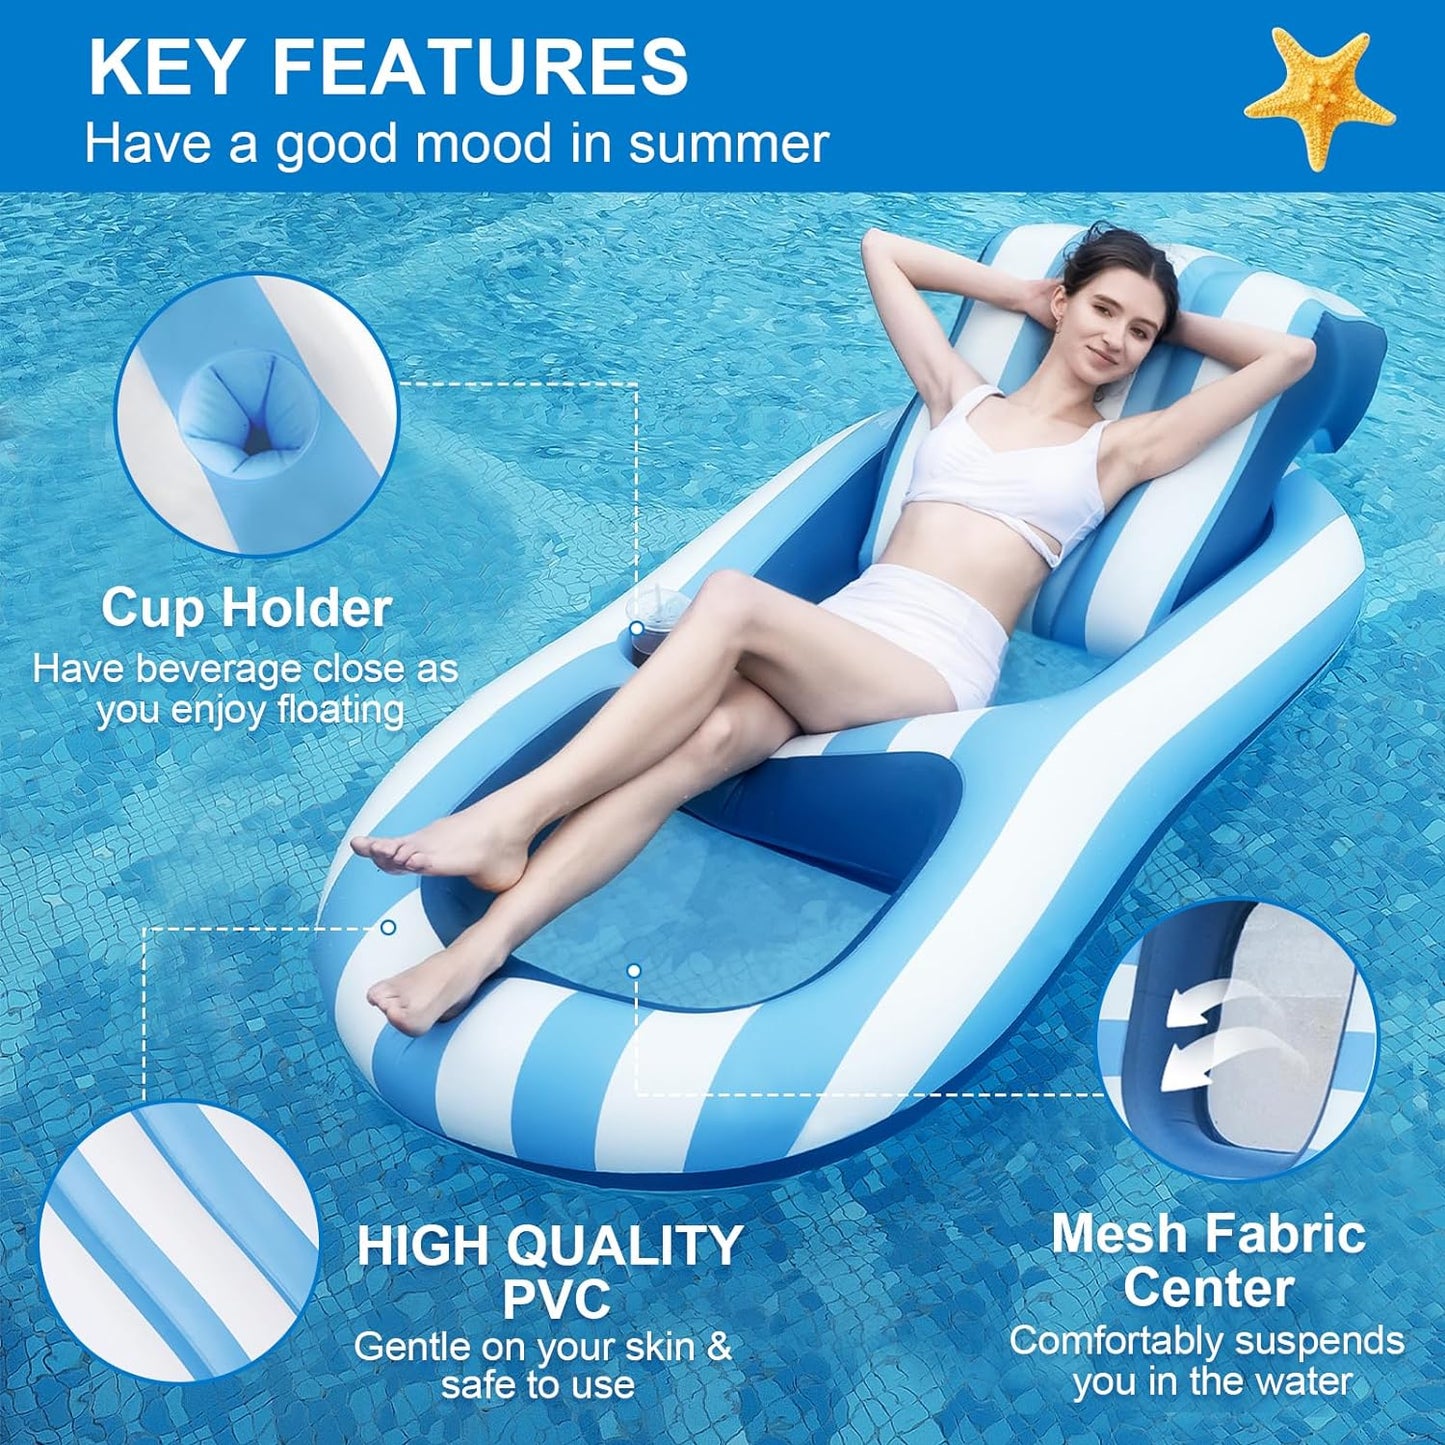 Pool Floats Adult Size, Inflatable Rafts Pool Lounger with Headrest & Cup Holder, Large Pool Floaties for Adult Heavy Duty Swimming Pool, Beach & Lake Sunbathing